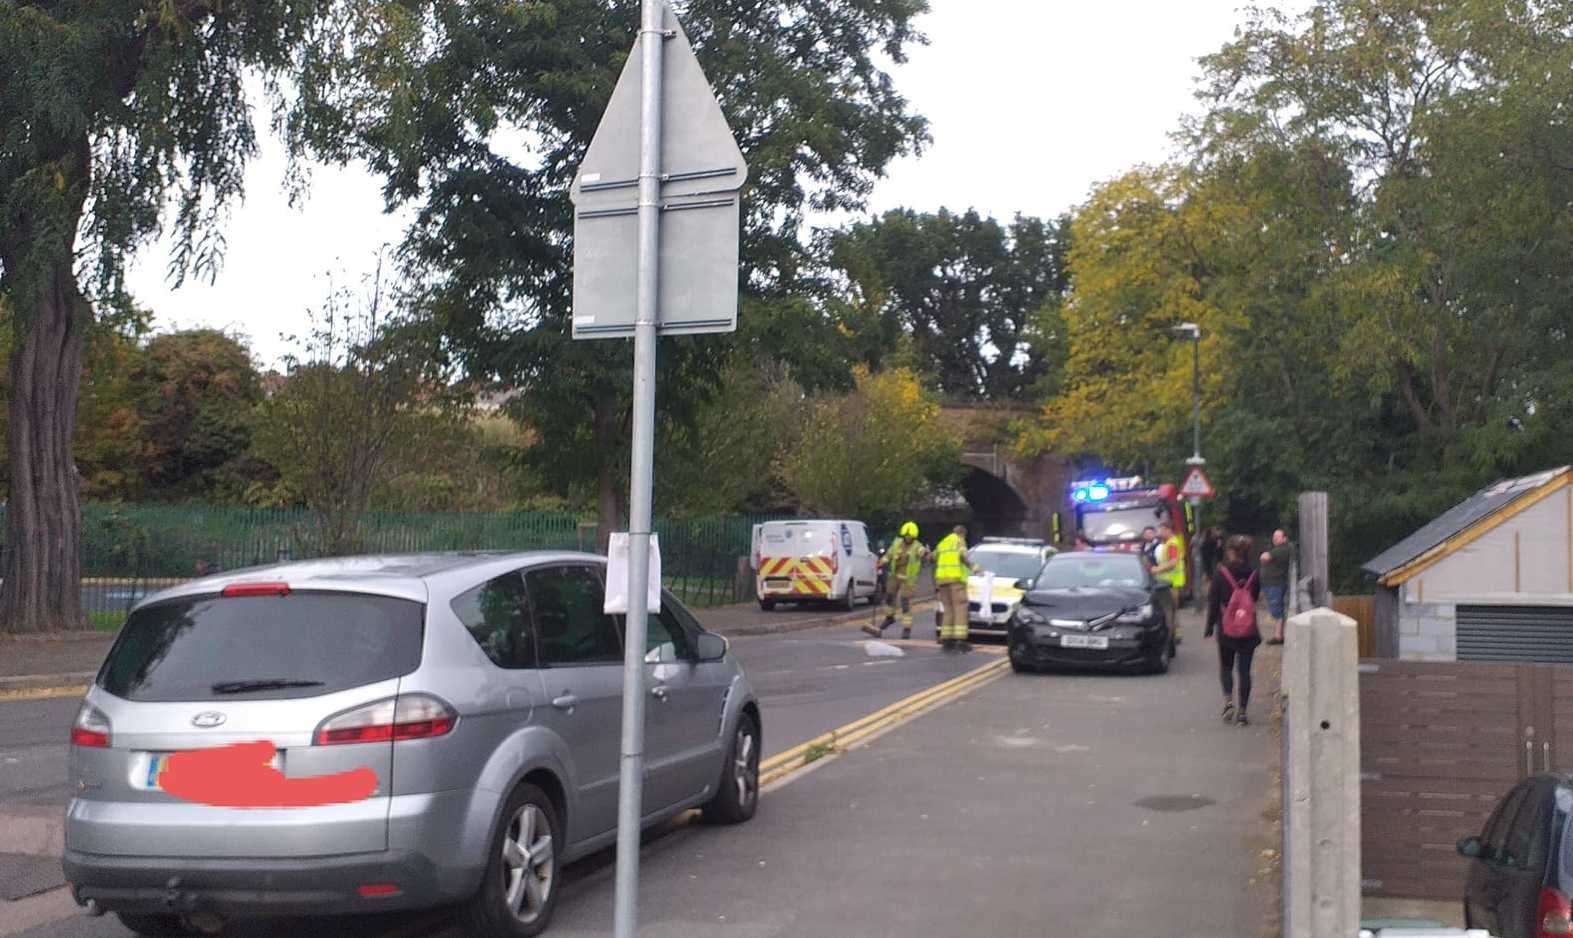 Emergency services were called to Old Manor Way, Barnehurst earlier this month following a crash. Photo: Clare Lodge